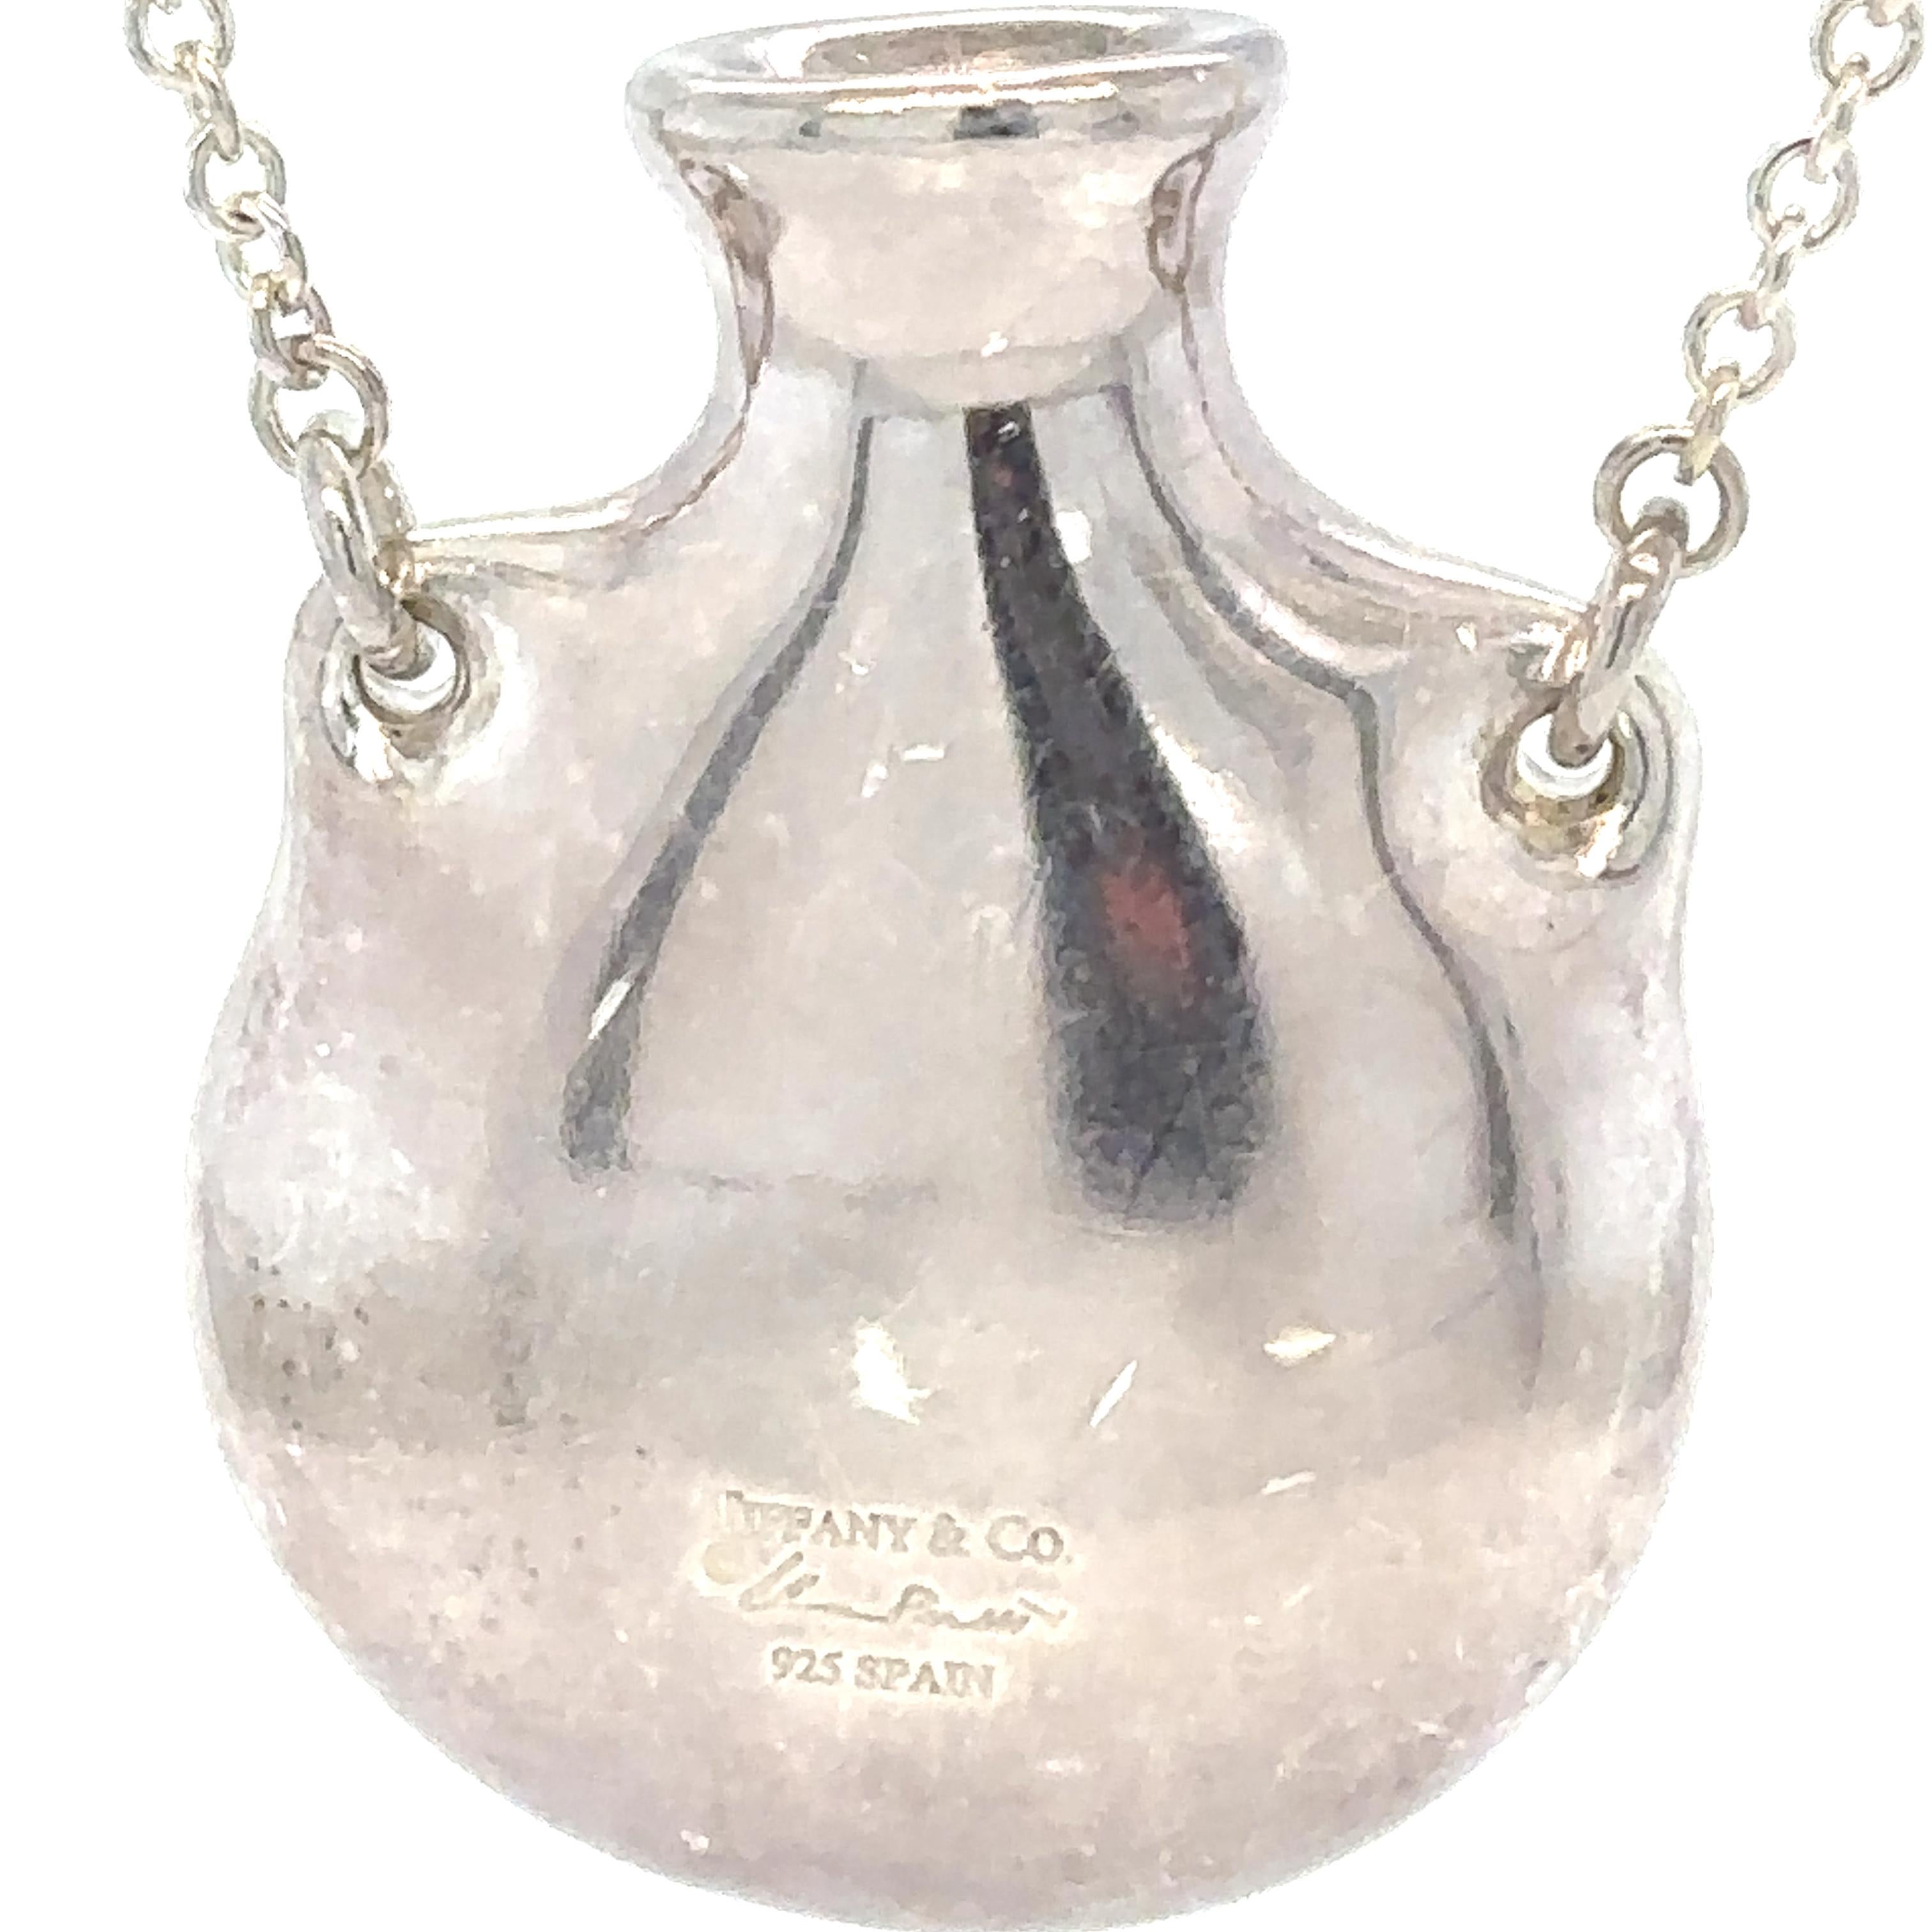 A Tiffany & Co Elsa Peretti Bottle and Neck Chain, made of Sterling Silver. Bottle 29 x 22mm. 

Metal: Sterling Silver
Carat: N/A
Colour: N/A
Clarity: N/A
Cut: N/A
Weight: 11.86 grams
Engravings/Markings: Signed Tiffany & Co Elsa Peretti 925